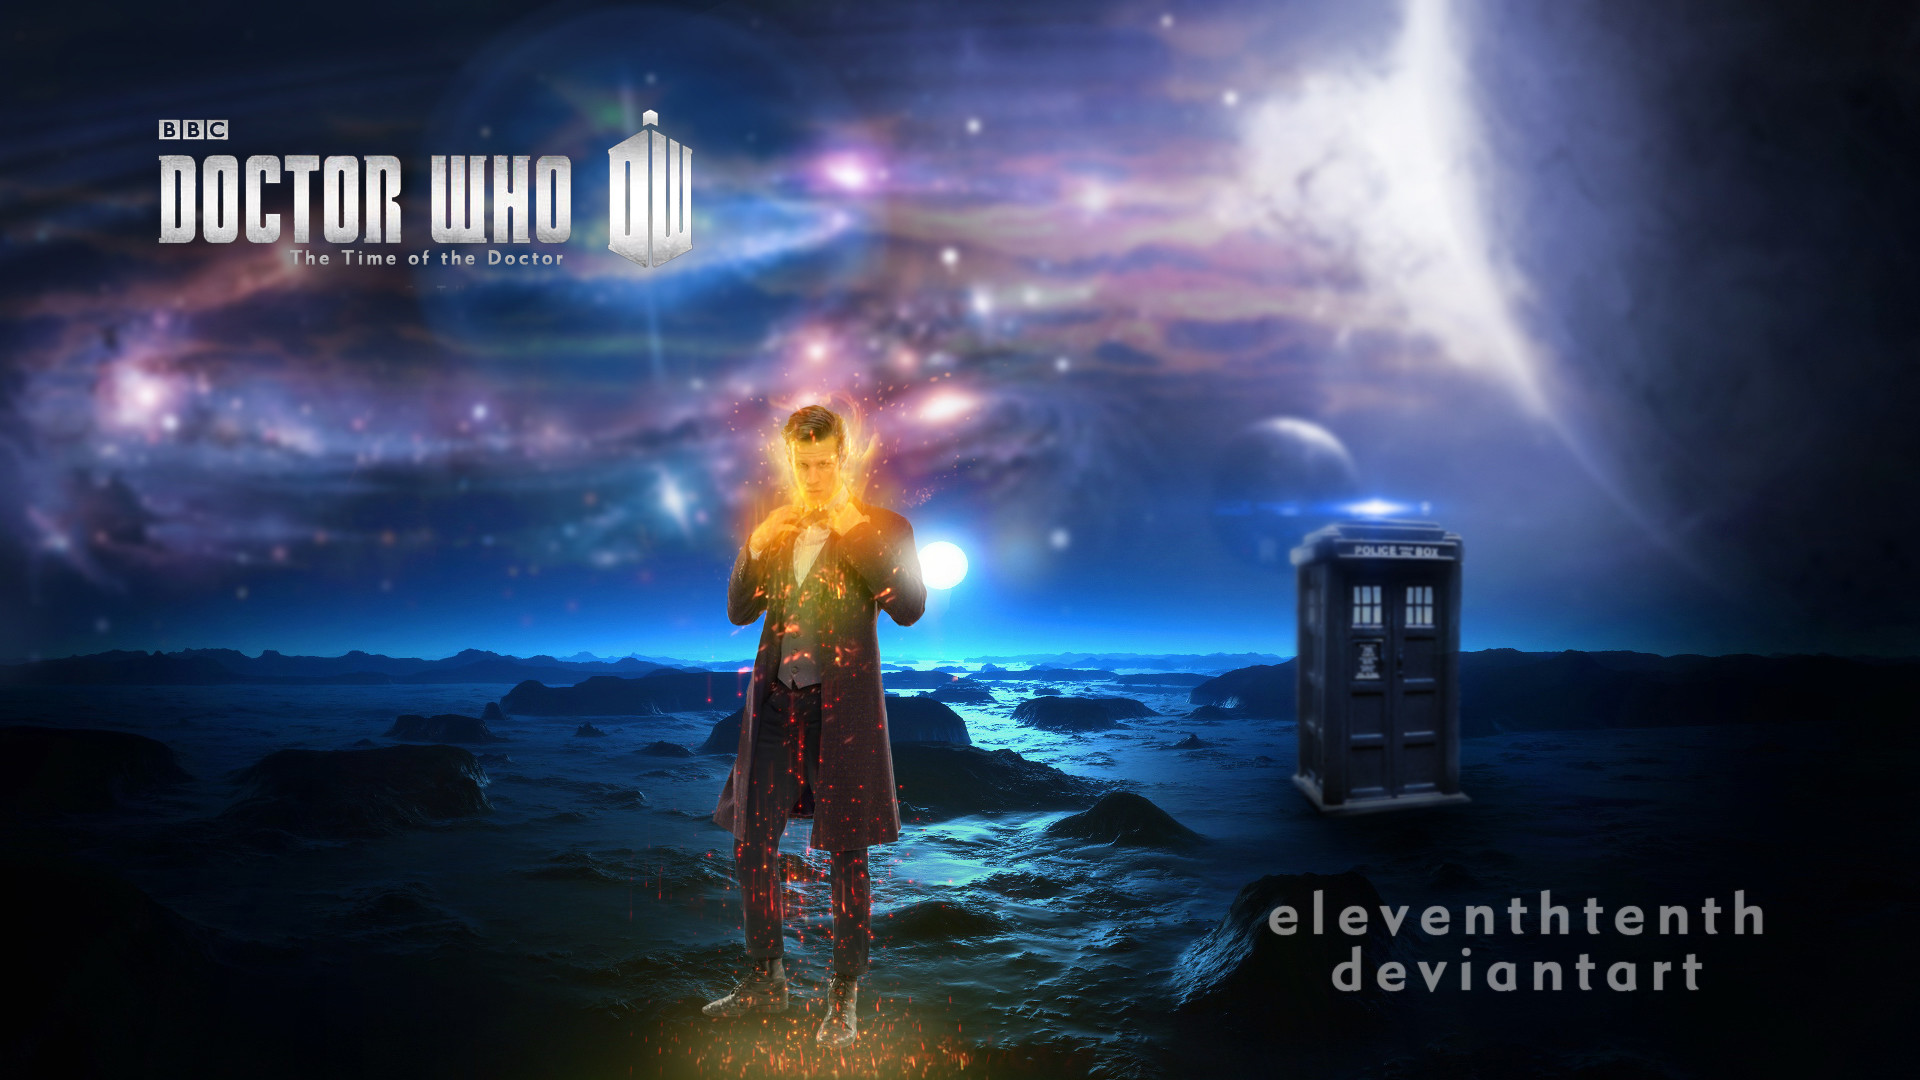 The Doctor And Amy Pond Doctor Who Wallpaper 19201080 Doctor Who Wallpapers Matt Smith